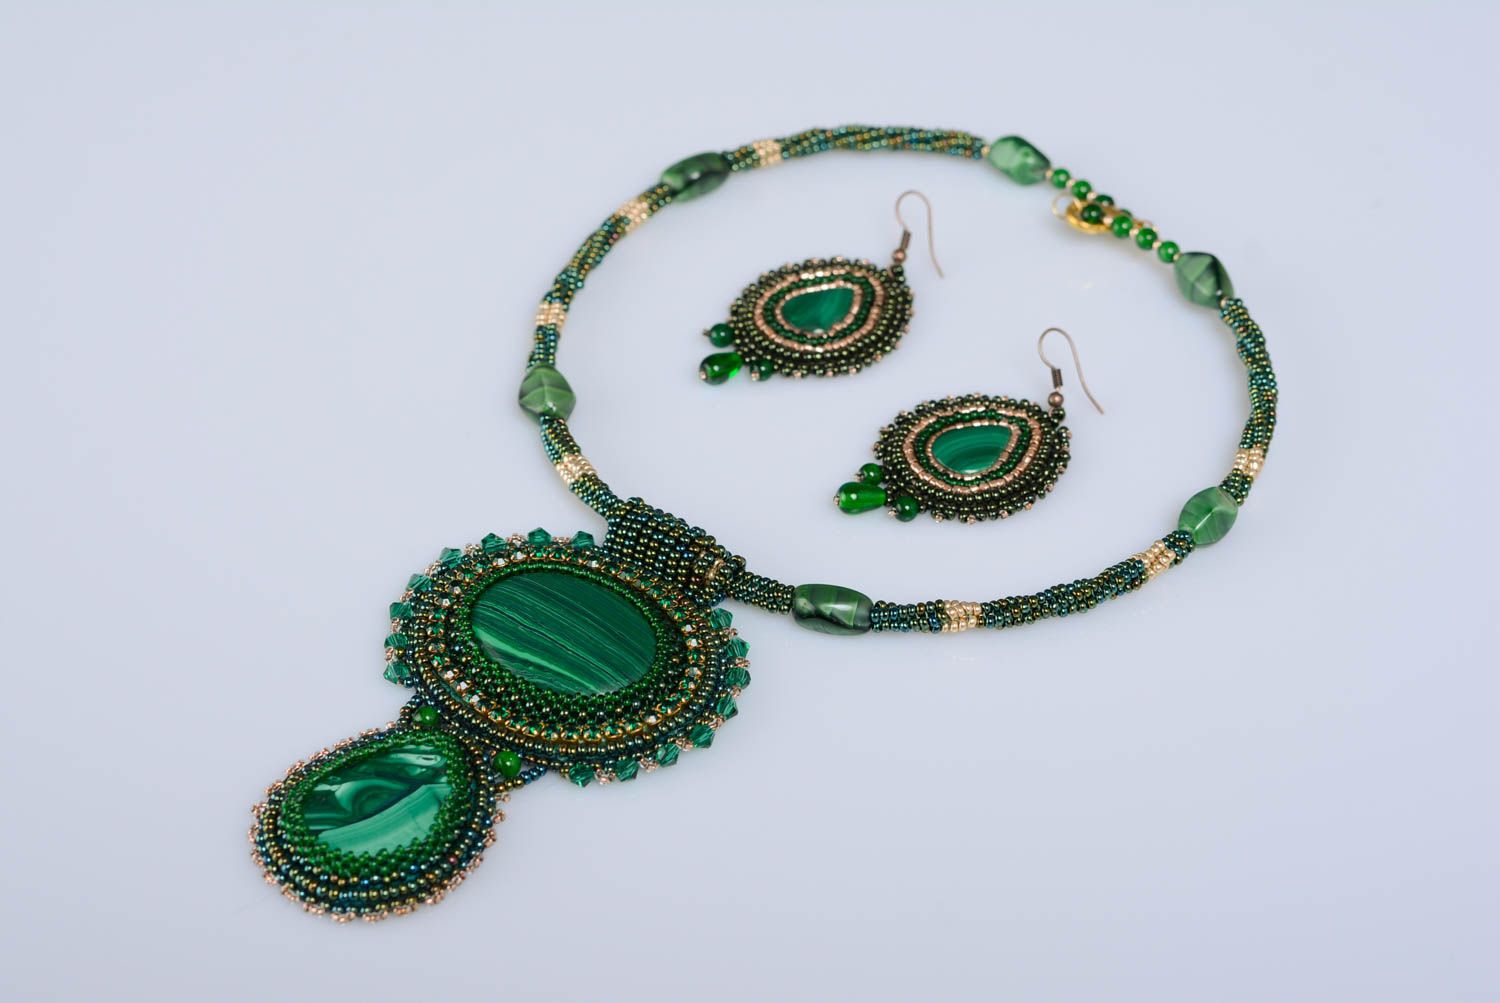 Set of handmade green bead embroidered jewelry 2 items necklace and earrings photo 1